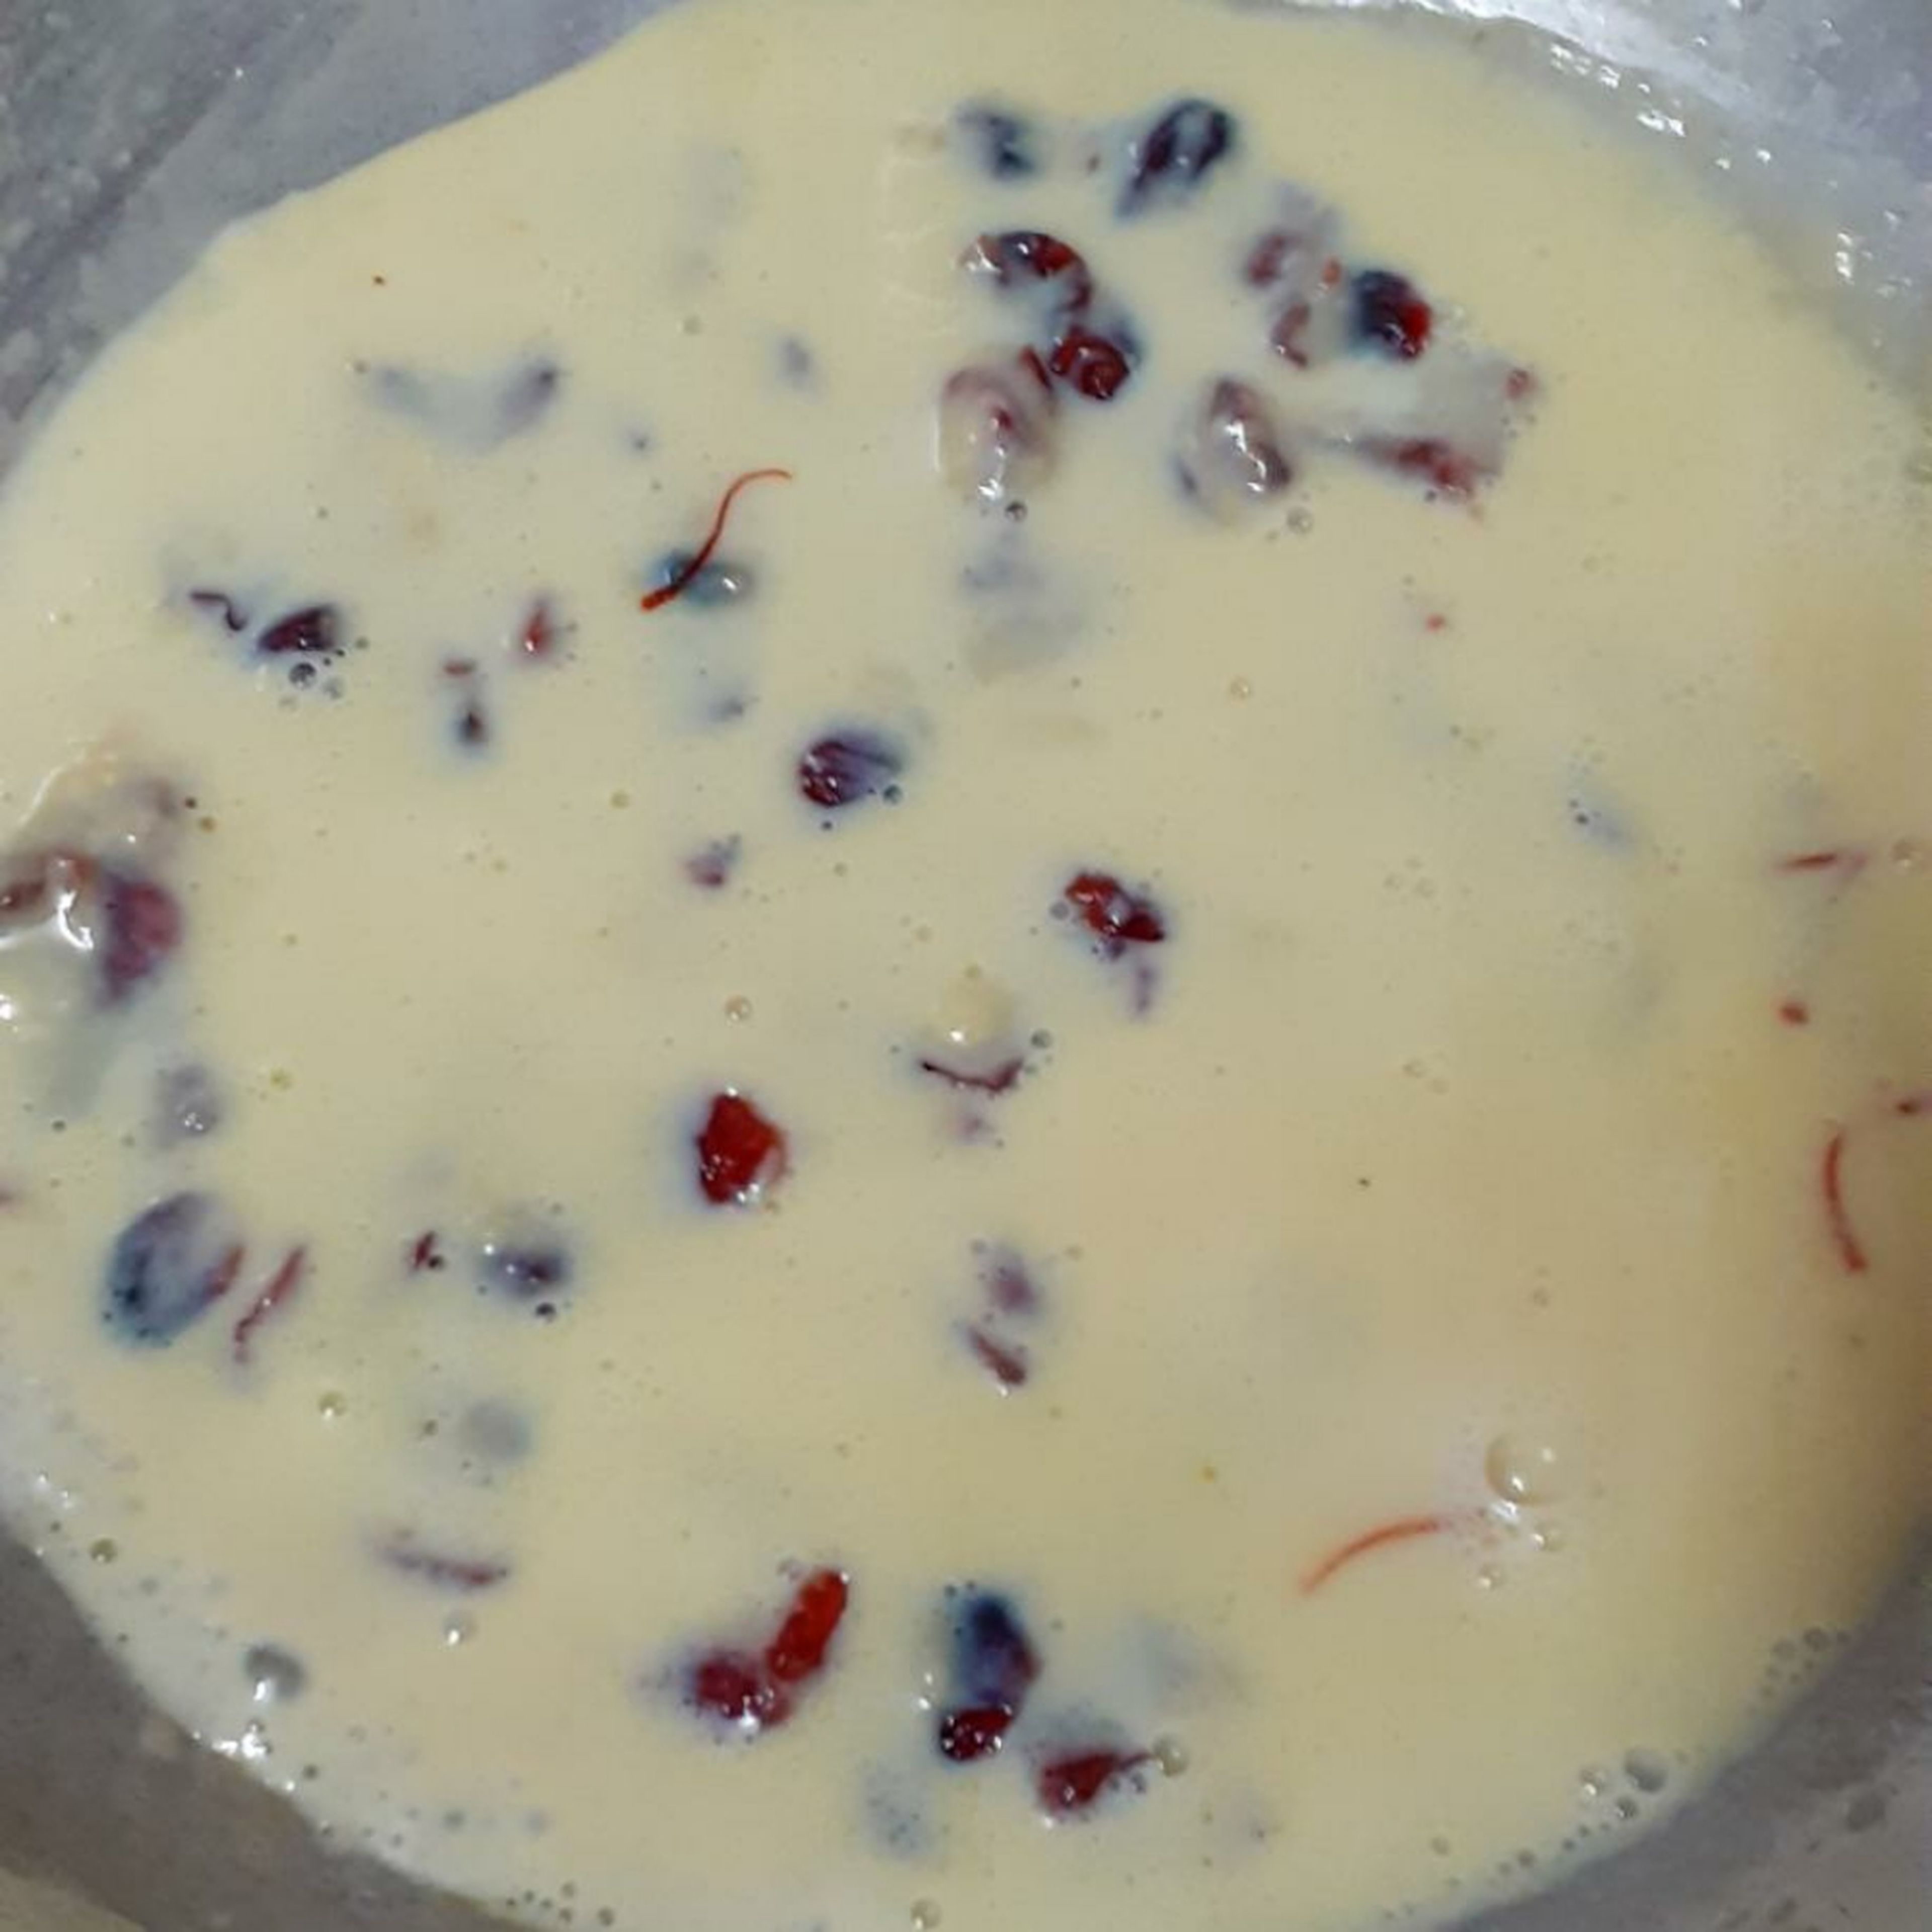 Add in the soaked saffron milk and chopped dried cranberries and cook on a low flame. (I prefer saffron, so soak it in the milk to be used for the recipe, before hand. Warm up the milk sligthly and a few saffron strands to the milk.) You can add in cardamom powder directly to the mixture instead of saffron.